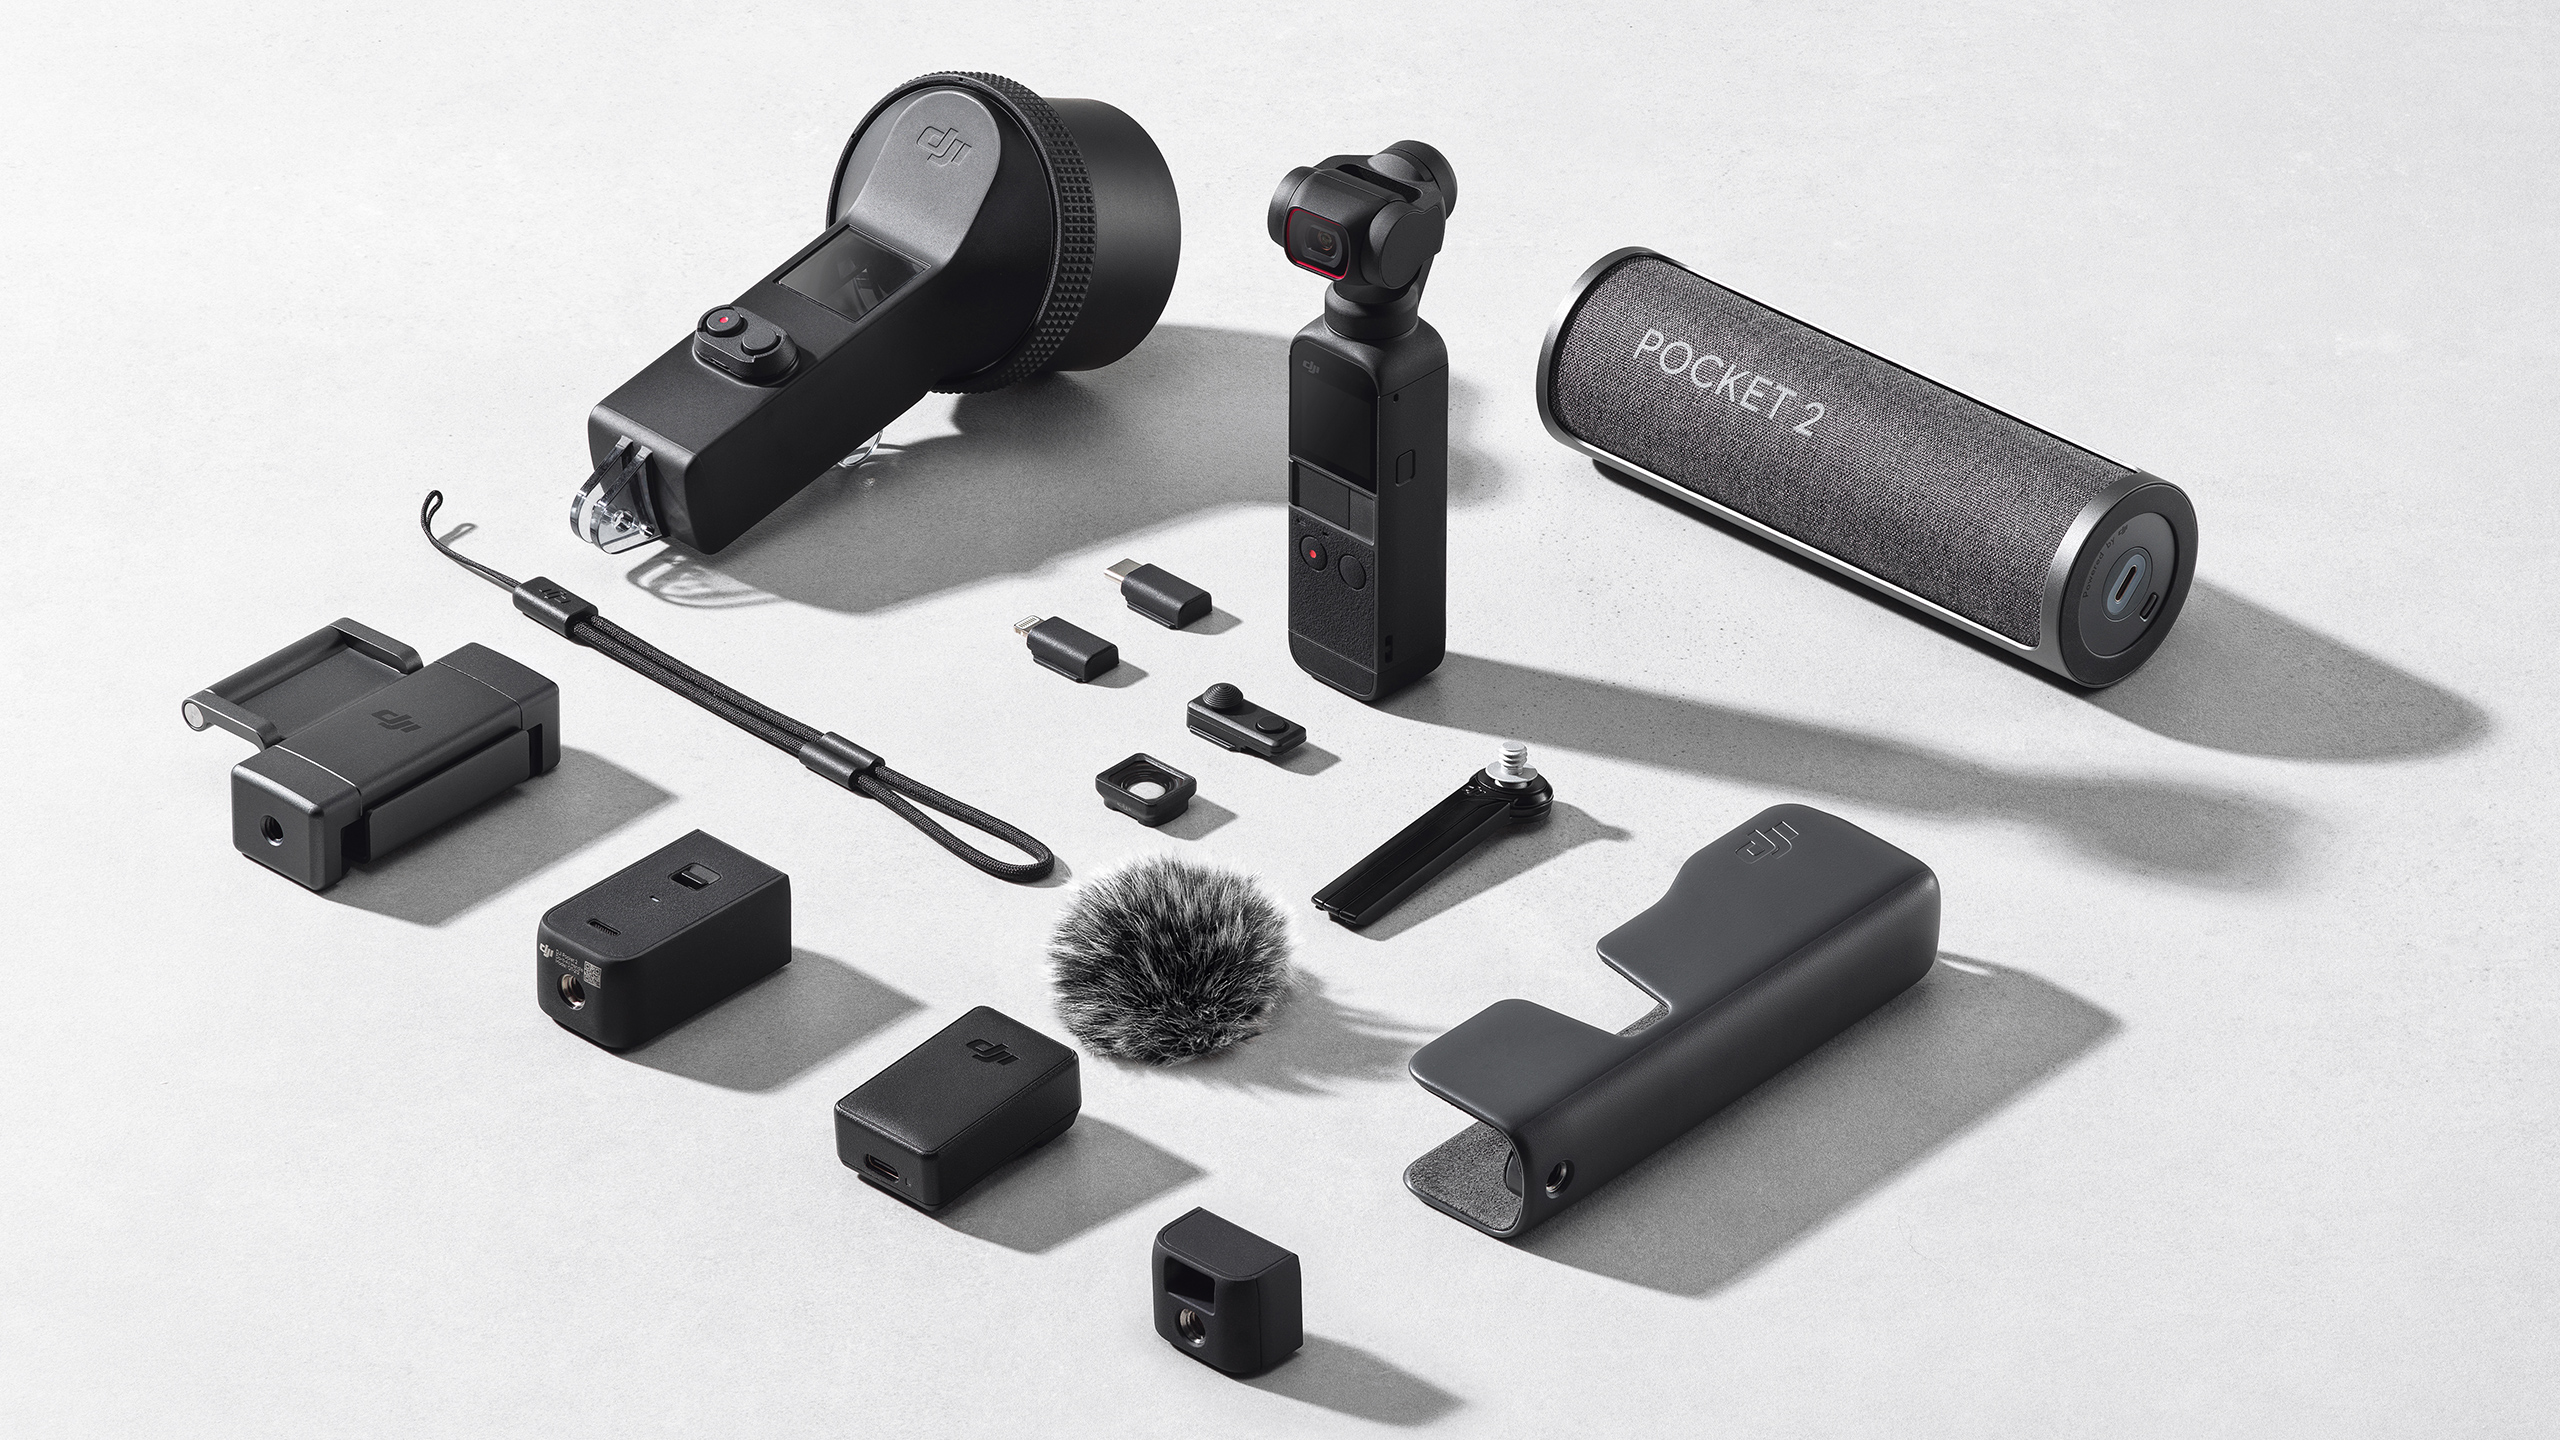 The DJI Pocket 2 with its entire range of add-ons and accessories.  (Image: DJI)